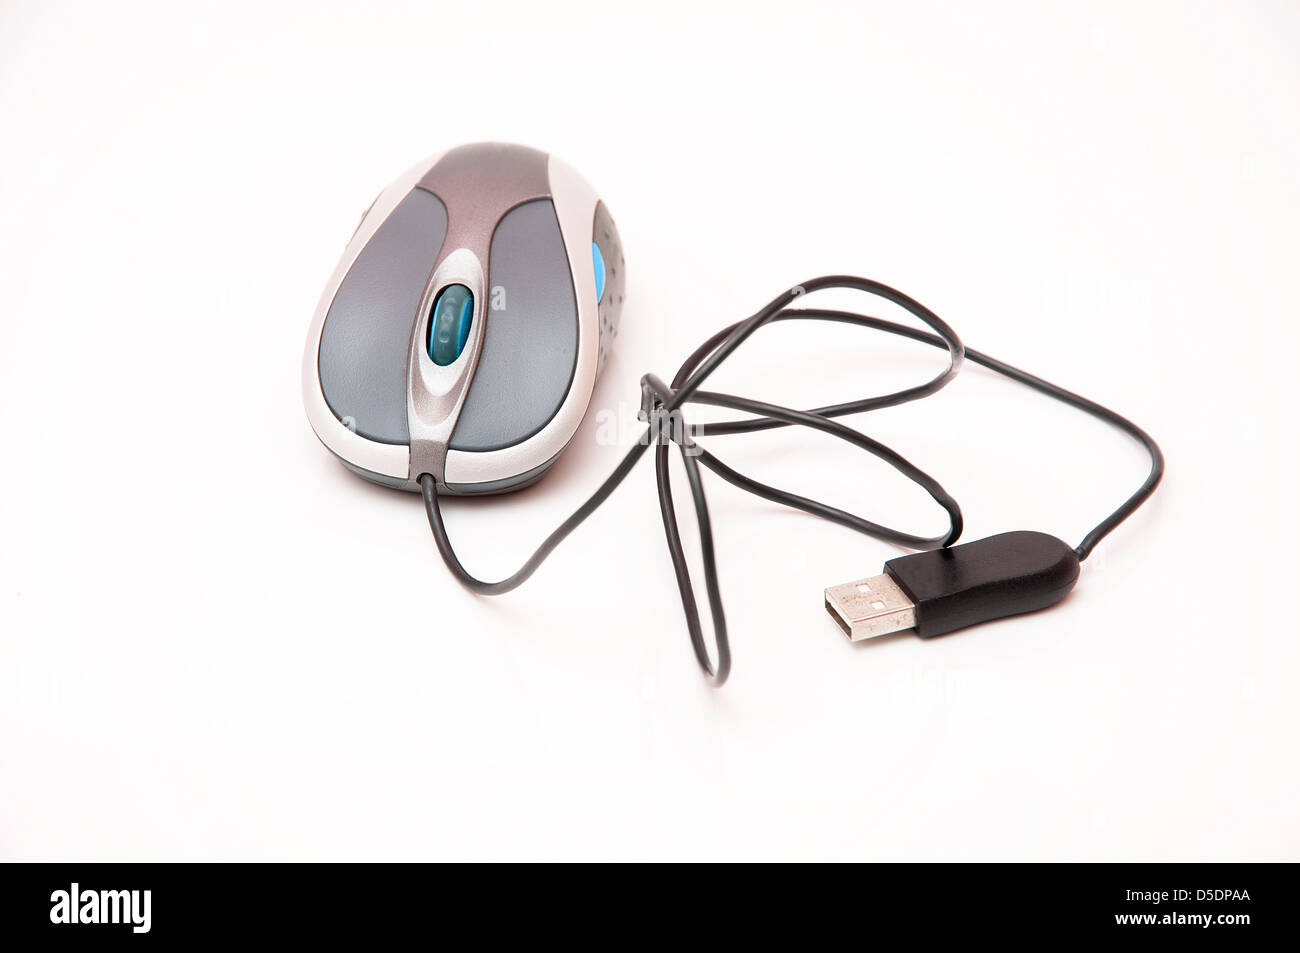 computer mouse to manage well your processes Stock Photo